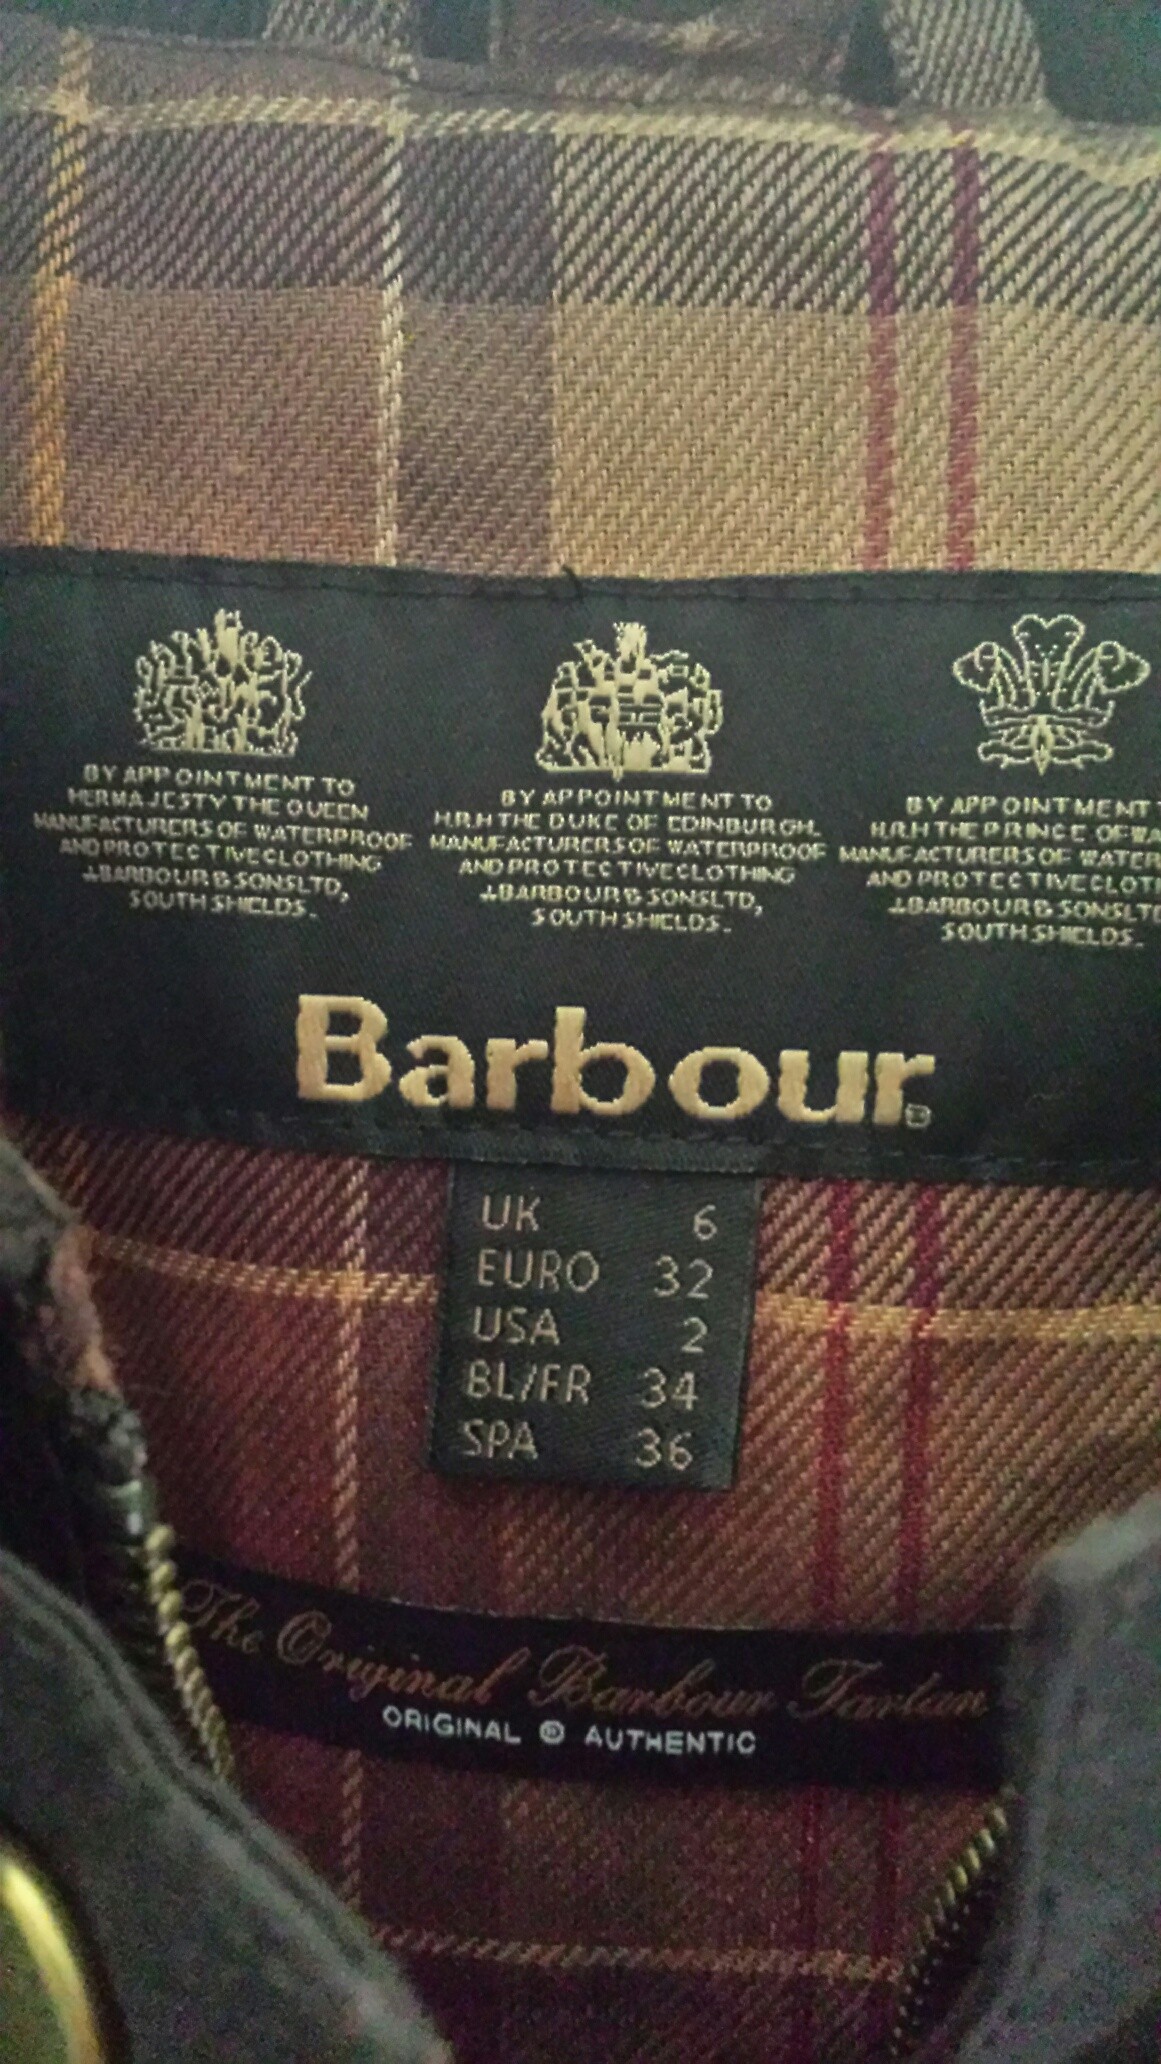 Barbour, where made? | Page 2 | Styleforum